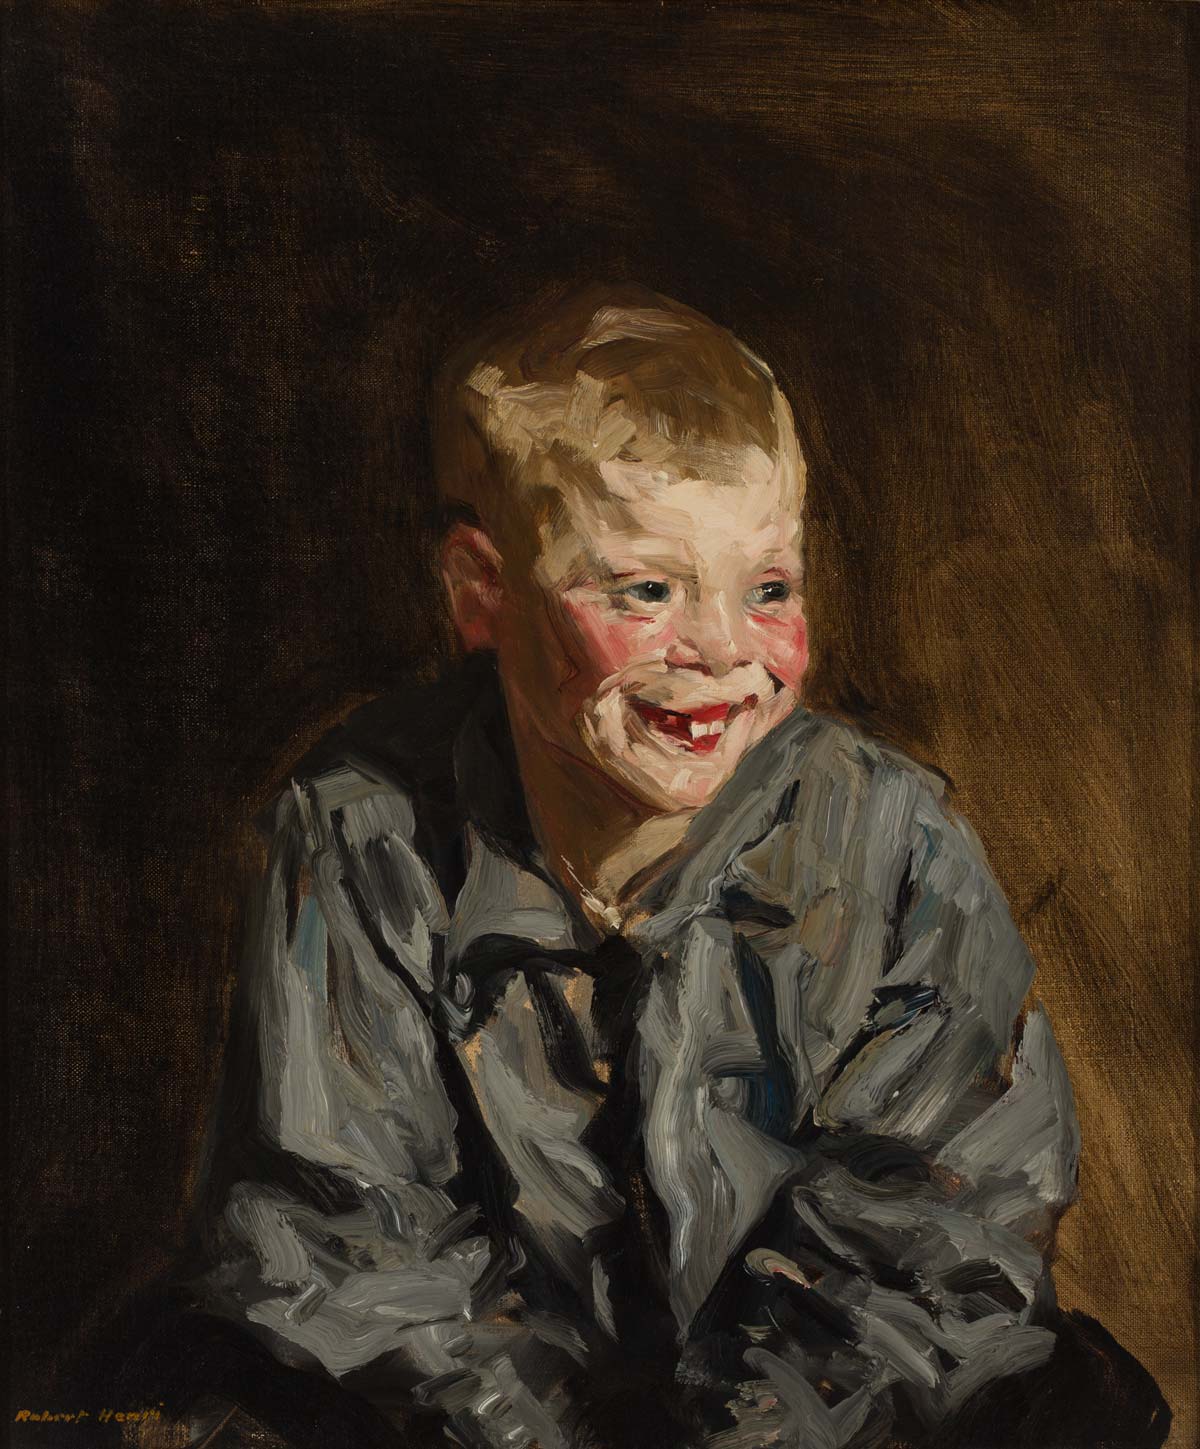 Portrait of a young boy with large front teeth